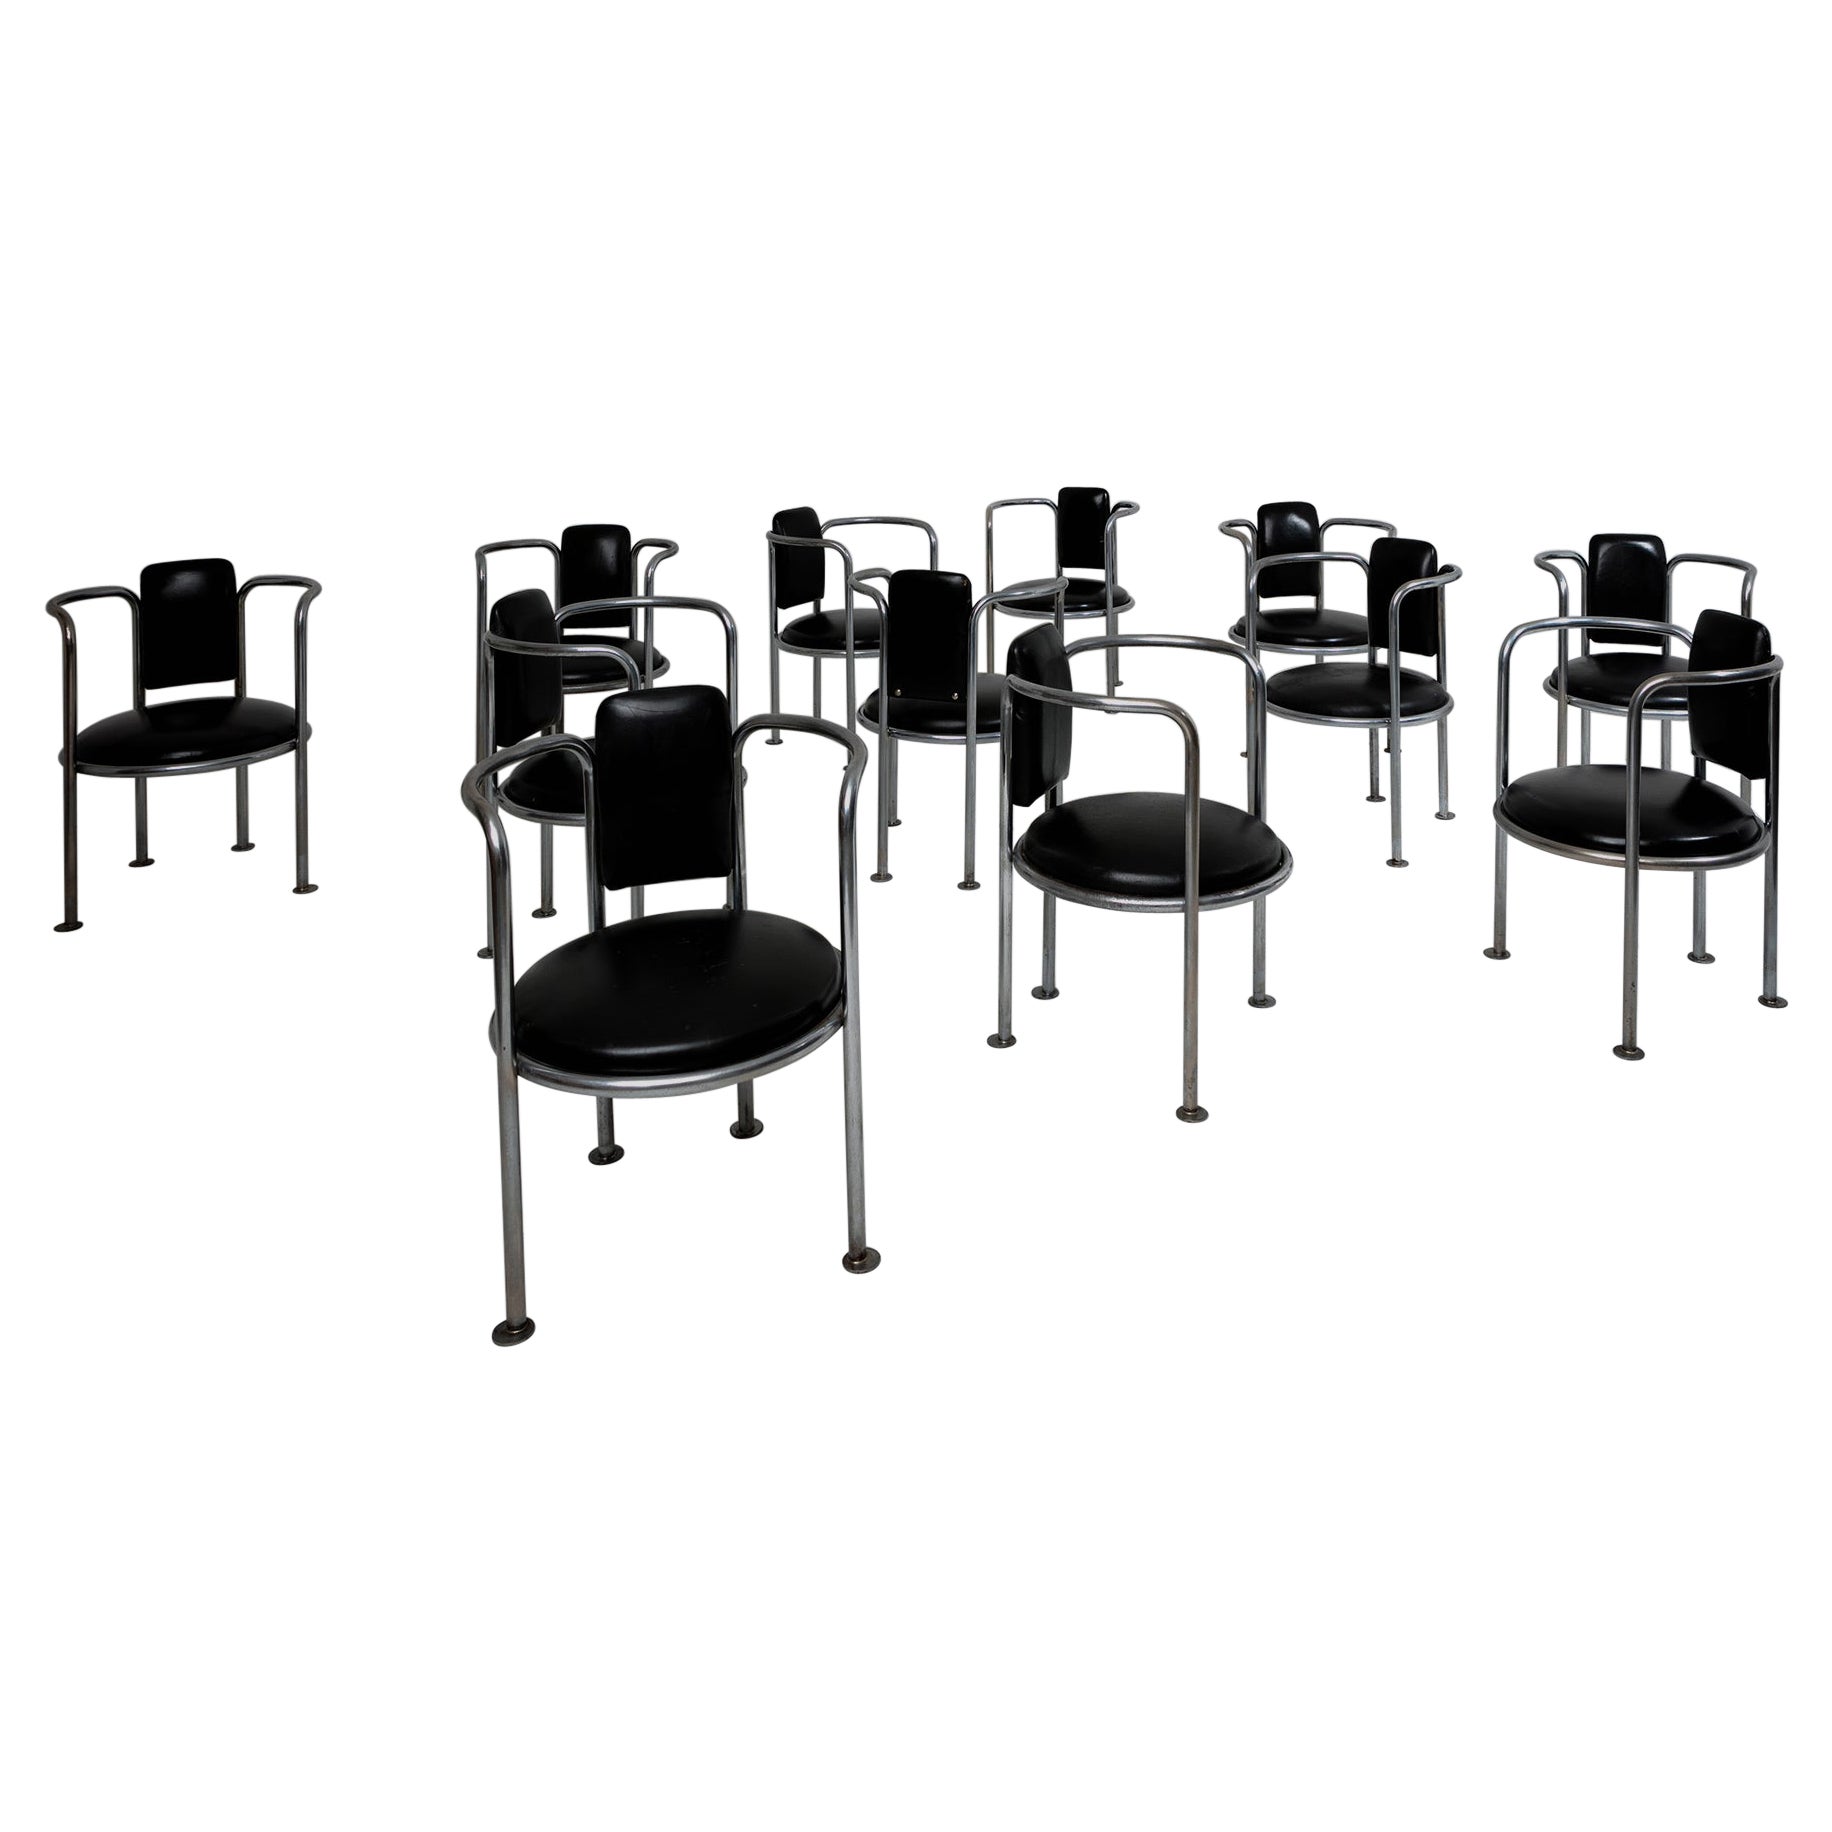 10 Chrome Black Leather Armchairs in the style of Gae Aulenti Poltronova, 1960s For Sale